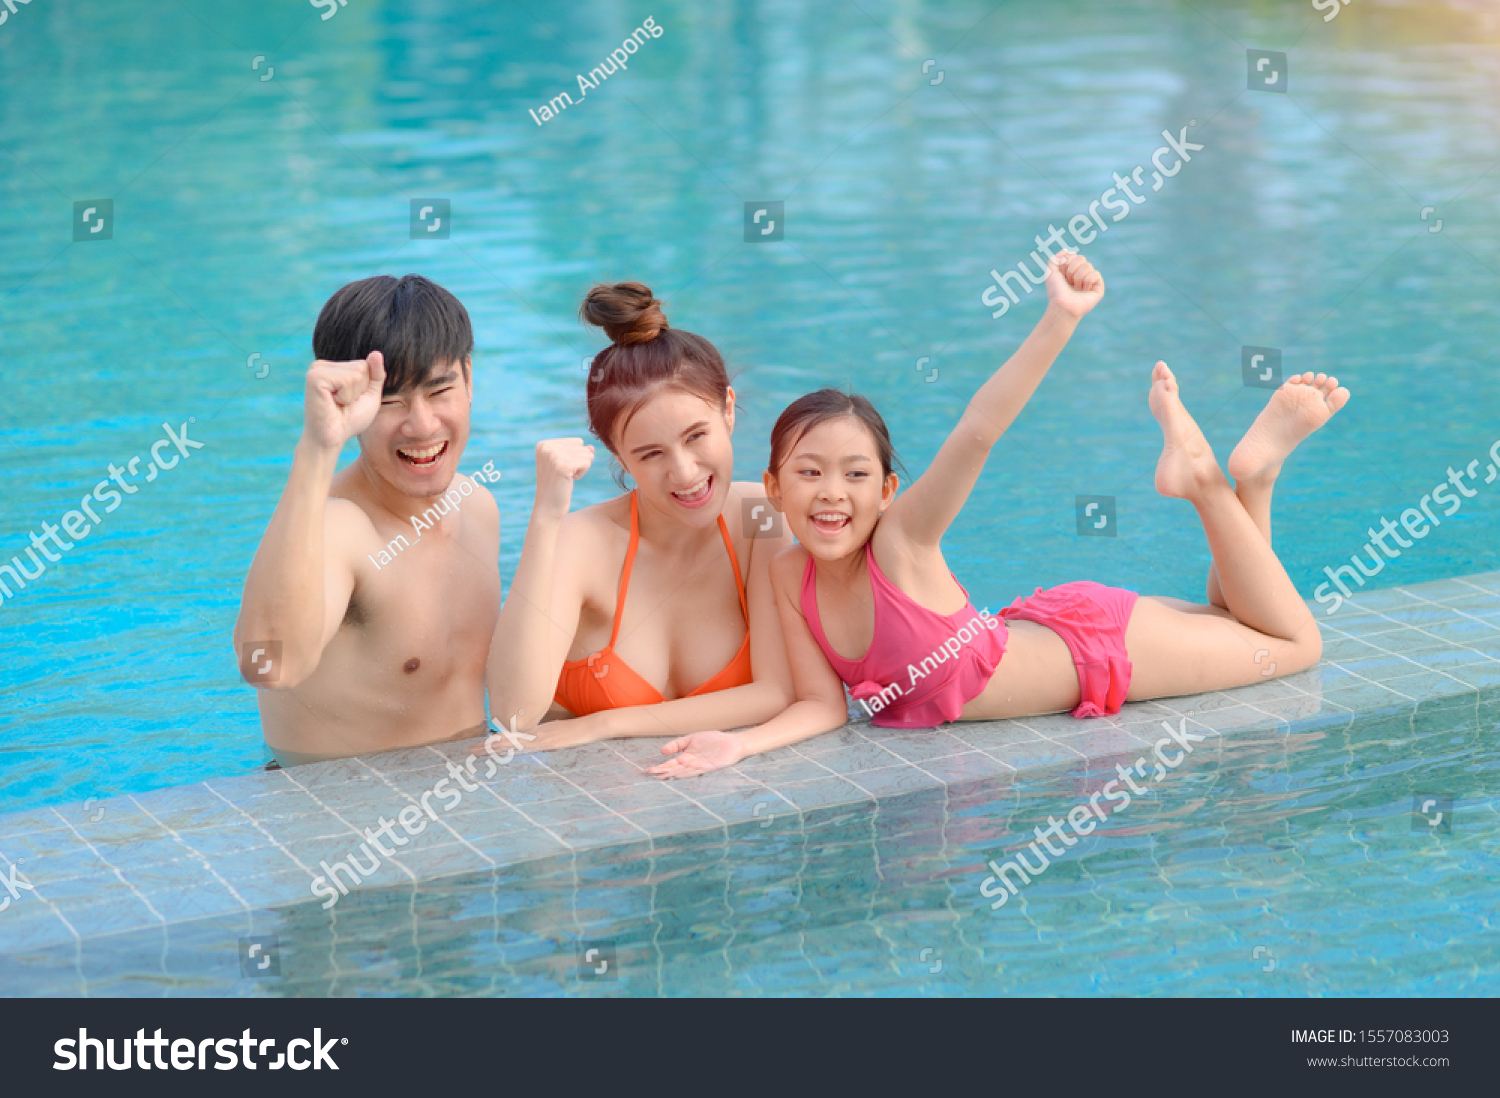 Couple bangs in a pool